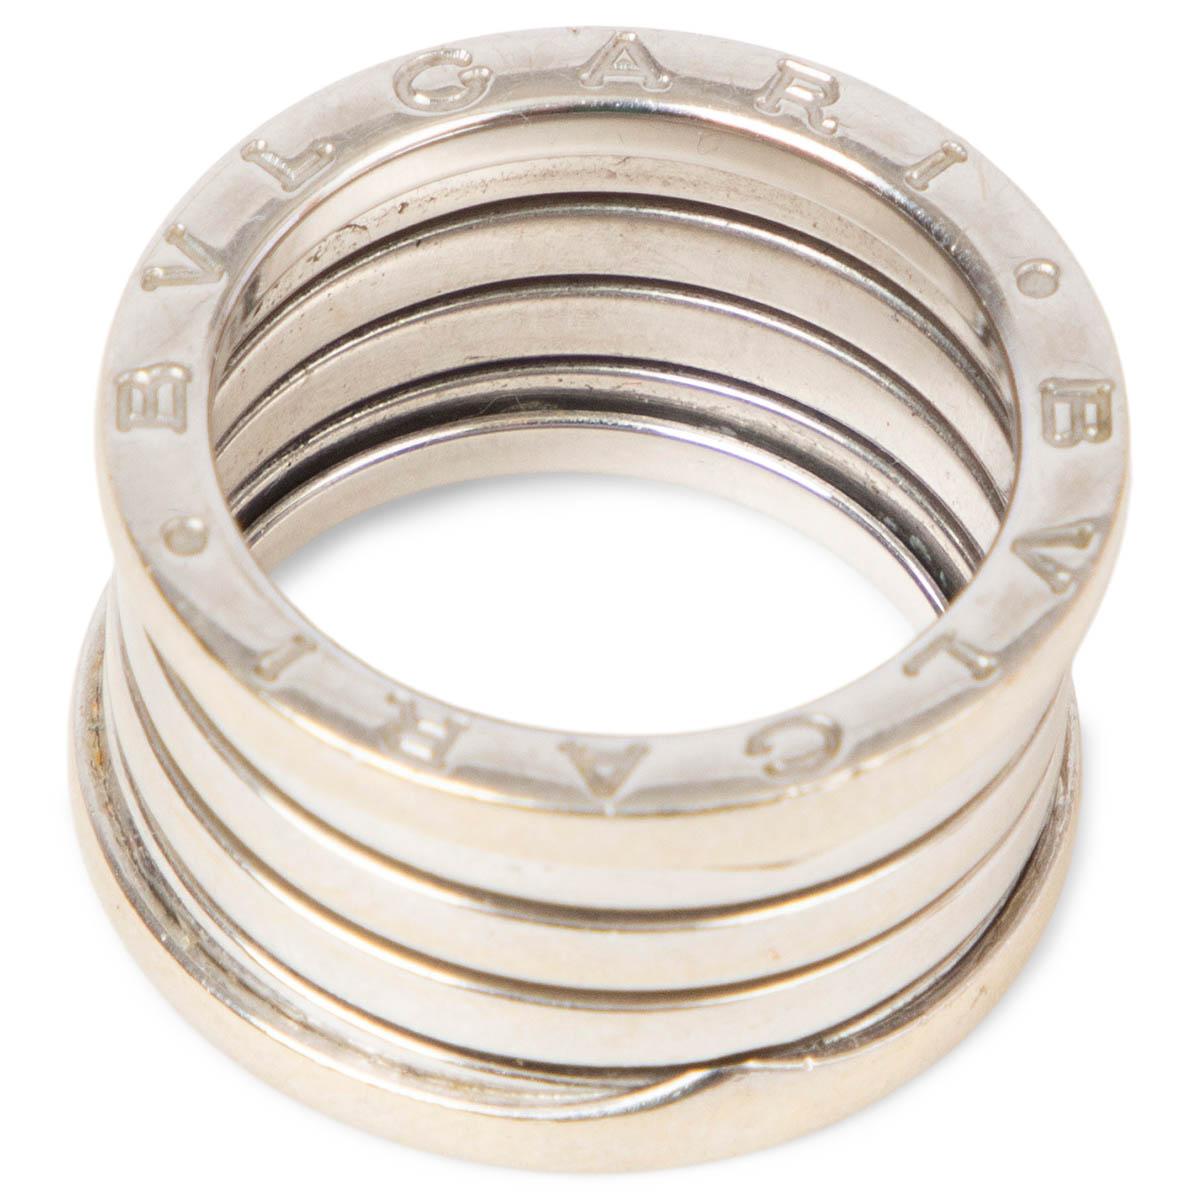 100% authentic Bulgari B. Zero1 ring in 18k white gold drawing its inspiration from the most renowned amphitheater of the world, the Colosseum, the B.zero1 ring is a true statement of Bulgari’s creative vision, challenging the very essence of